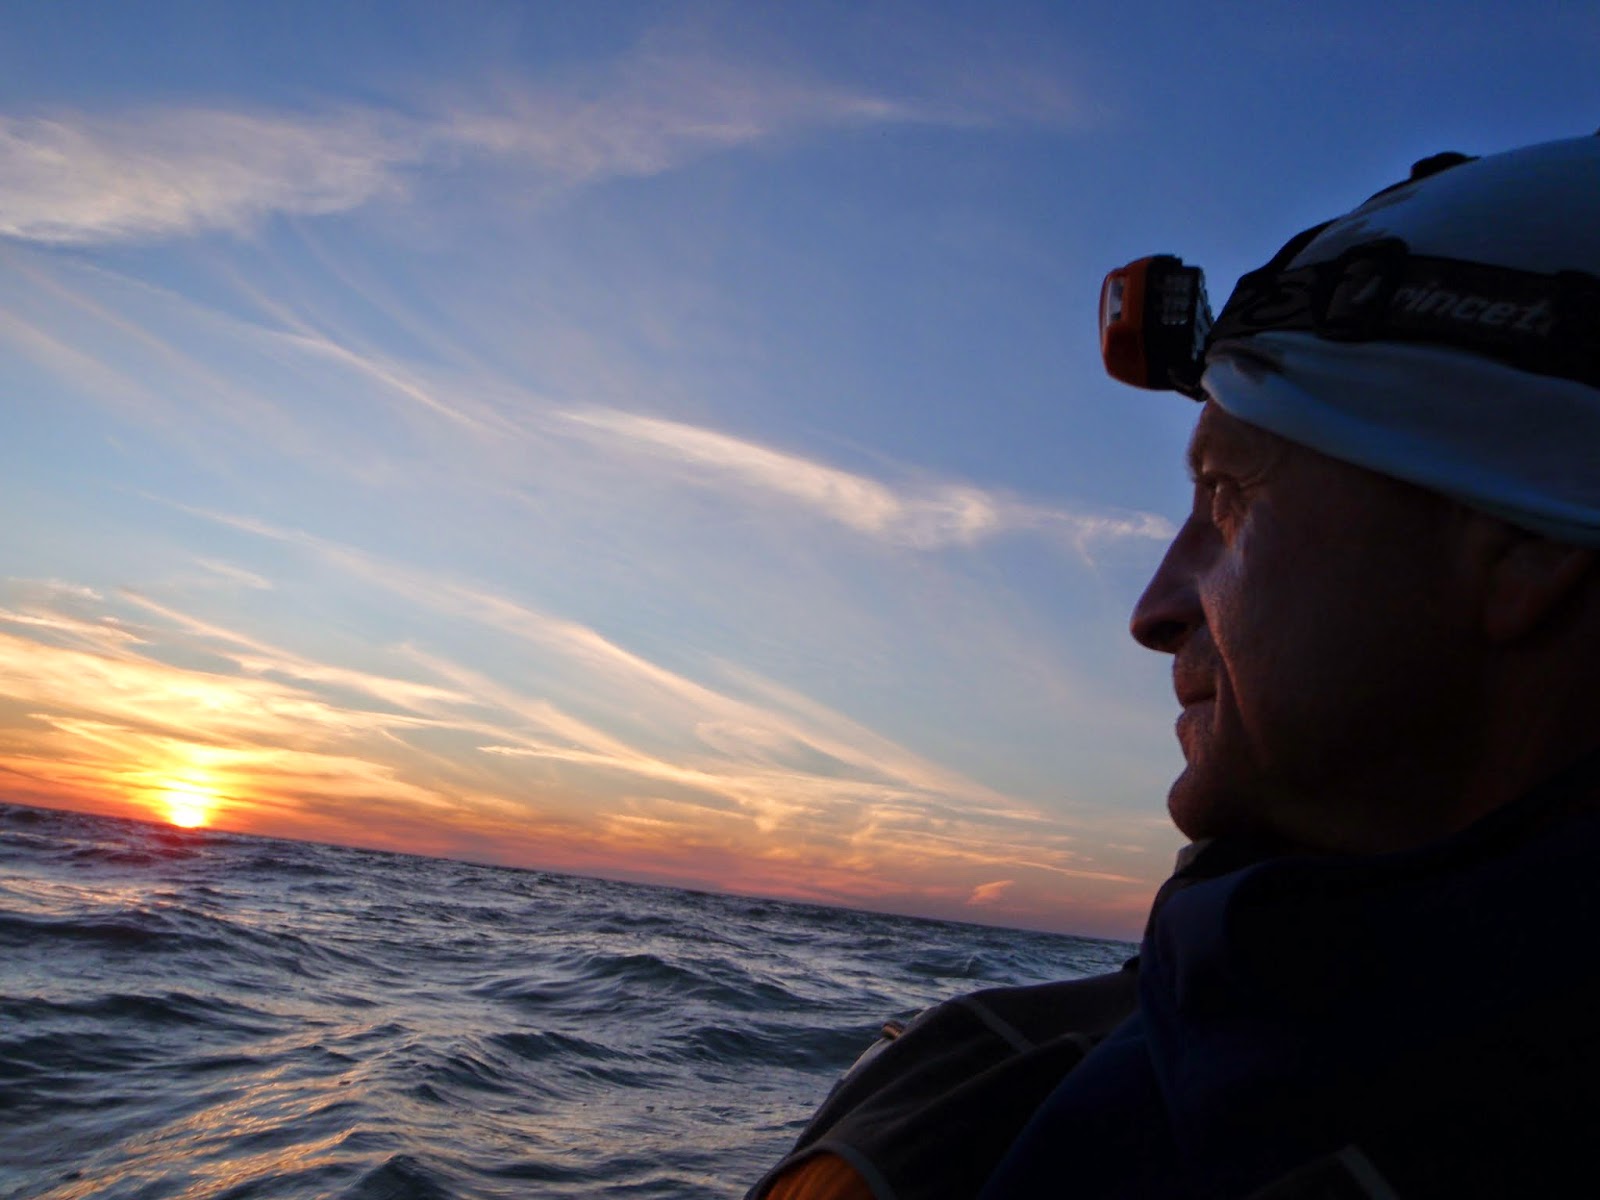 Robert Finlay watching the sunset on the Gulf of Mexico